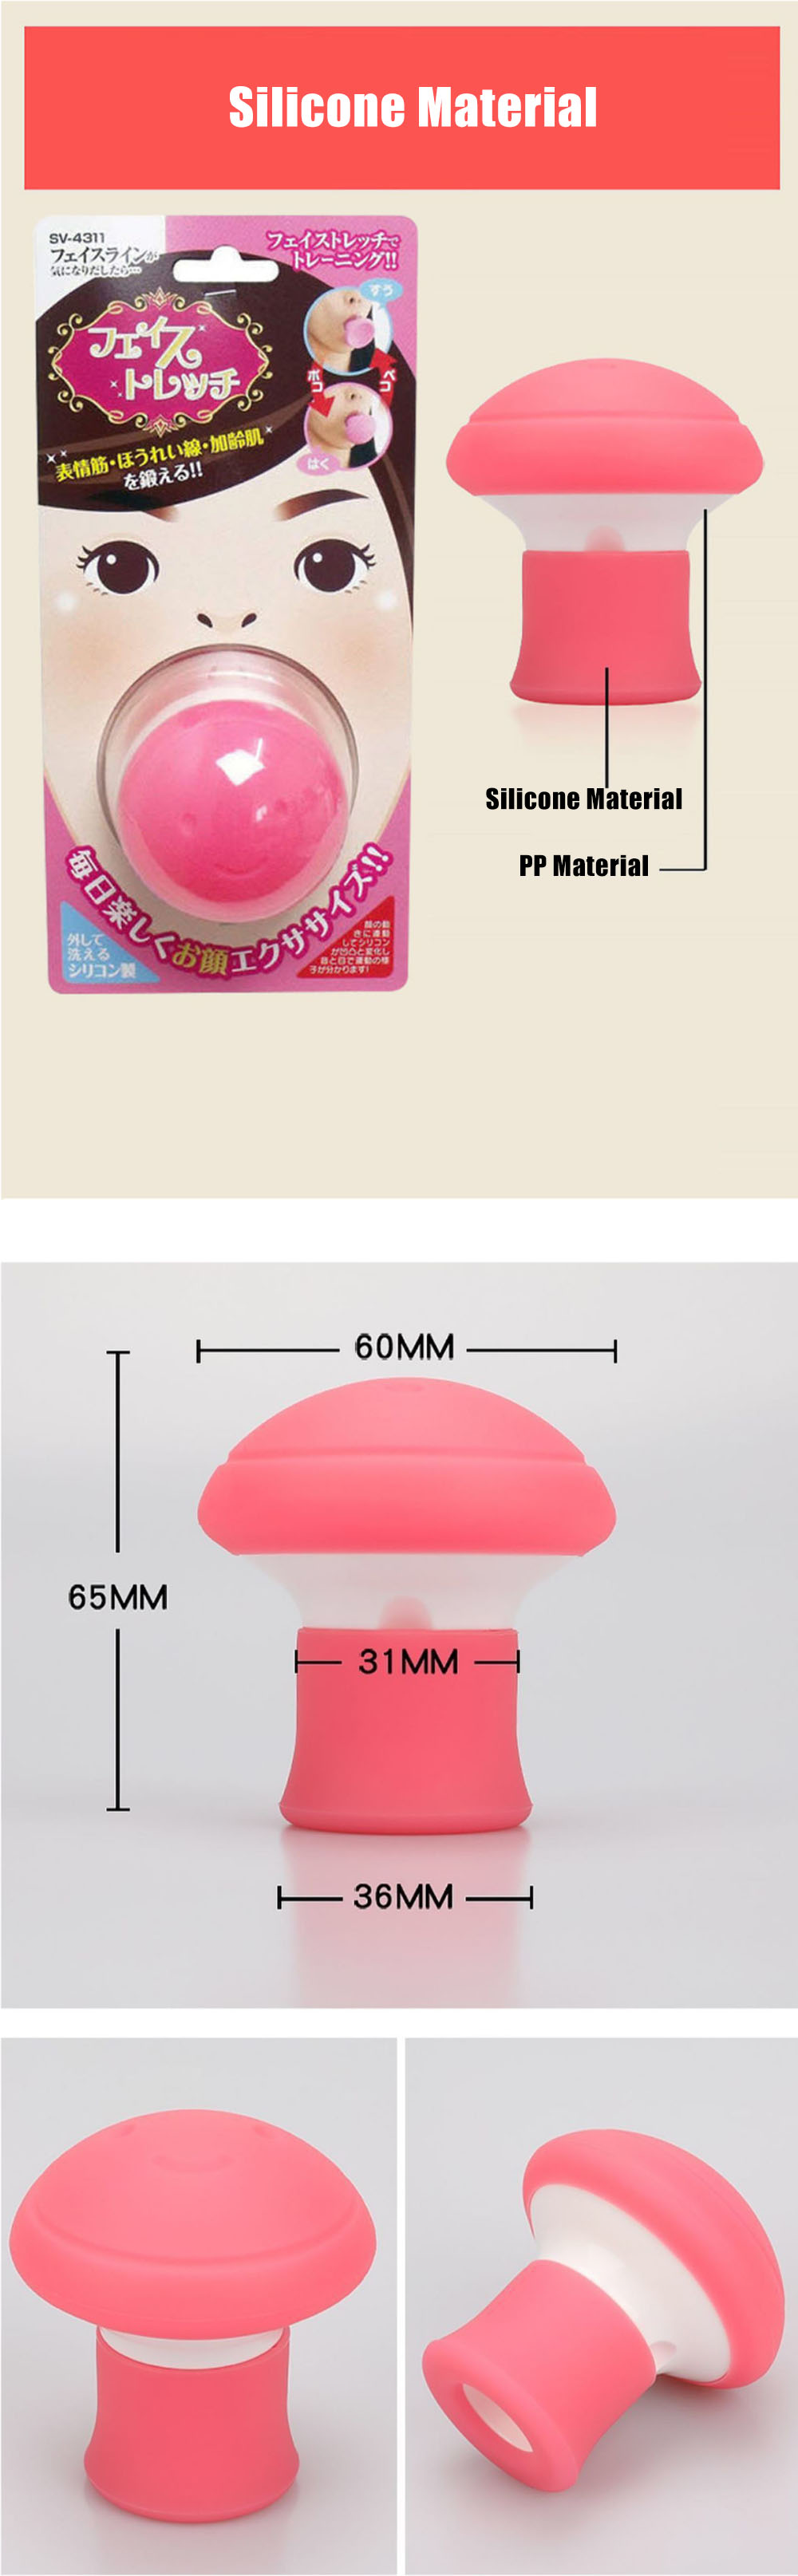 Silicone-V-Face-Facial-Lifter-Face-Slimming-Apparatus-Double-Chin-Slim-Skin-Care-Tool-Muscle-Express-1906858-2